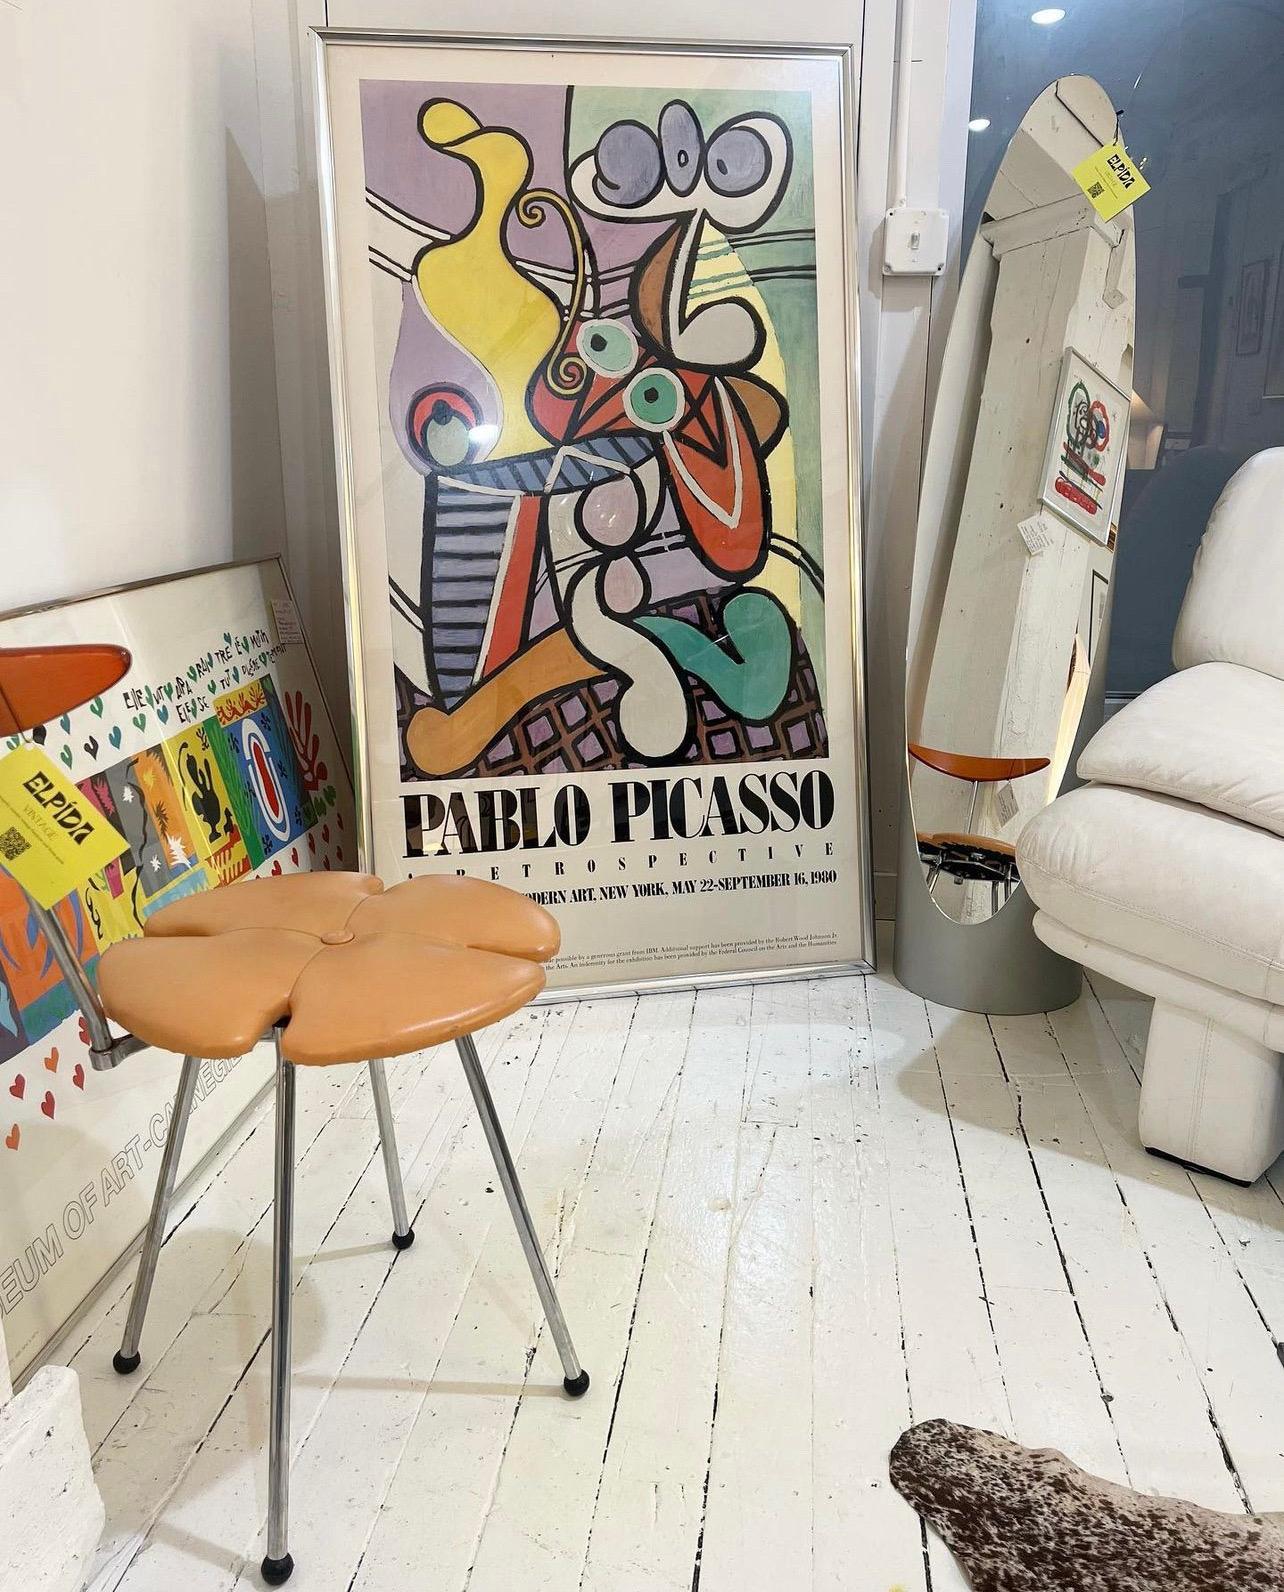 Massive Picasso Lithograph, A Retrospective exhibited at The Museum of Modern Art, New York, May 22 - September 16, 1980

Framed and ready to hang.